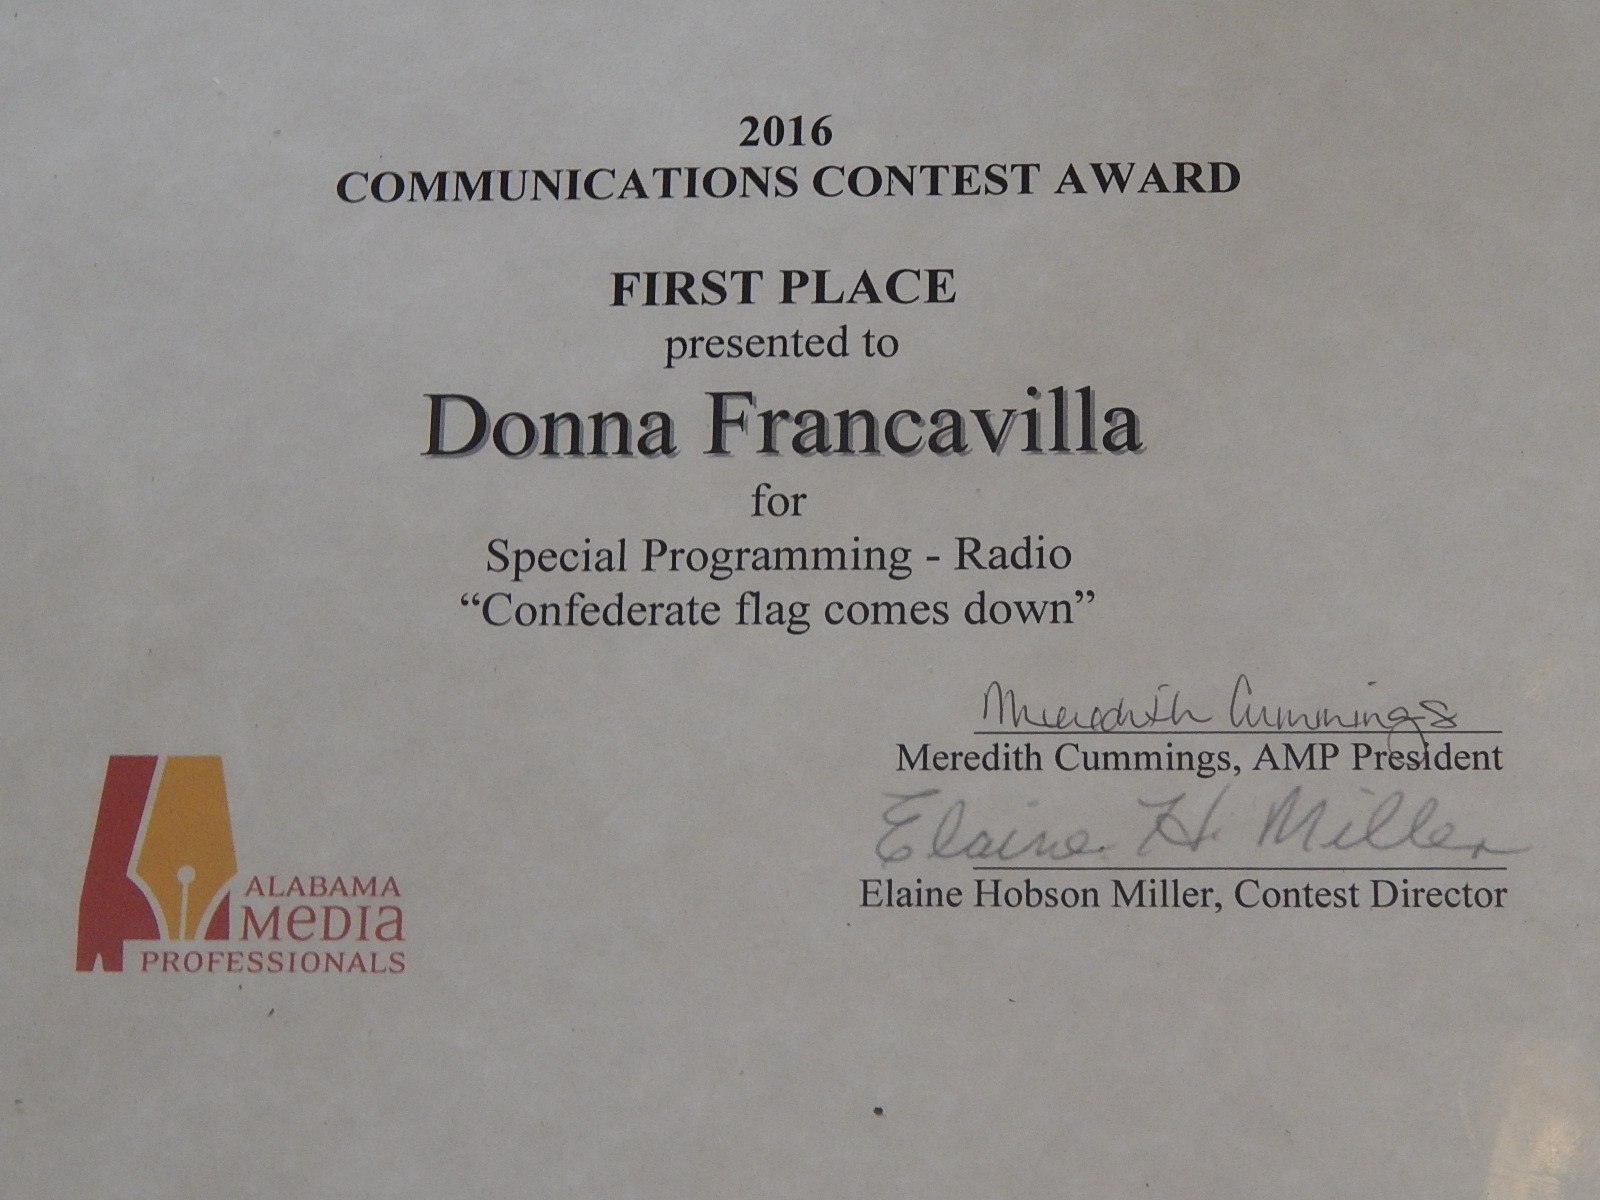 2016 Alabama Media Professionals Communications Contest Award - State Award - First Place presented to Donna Francavilla for Special Programming - Radio "Confederate Flag Comes Down"